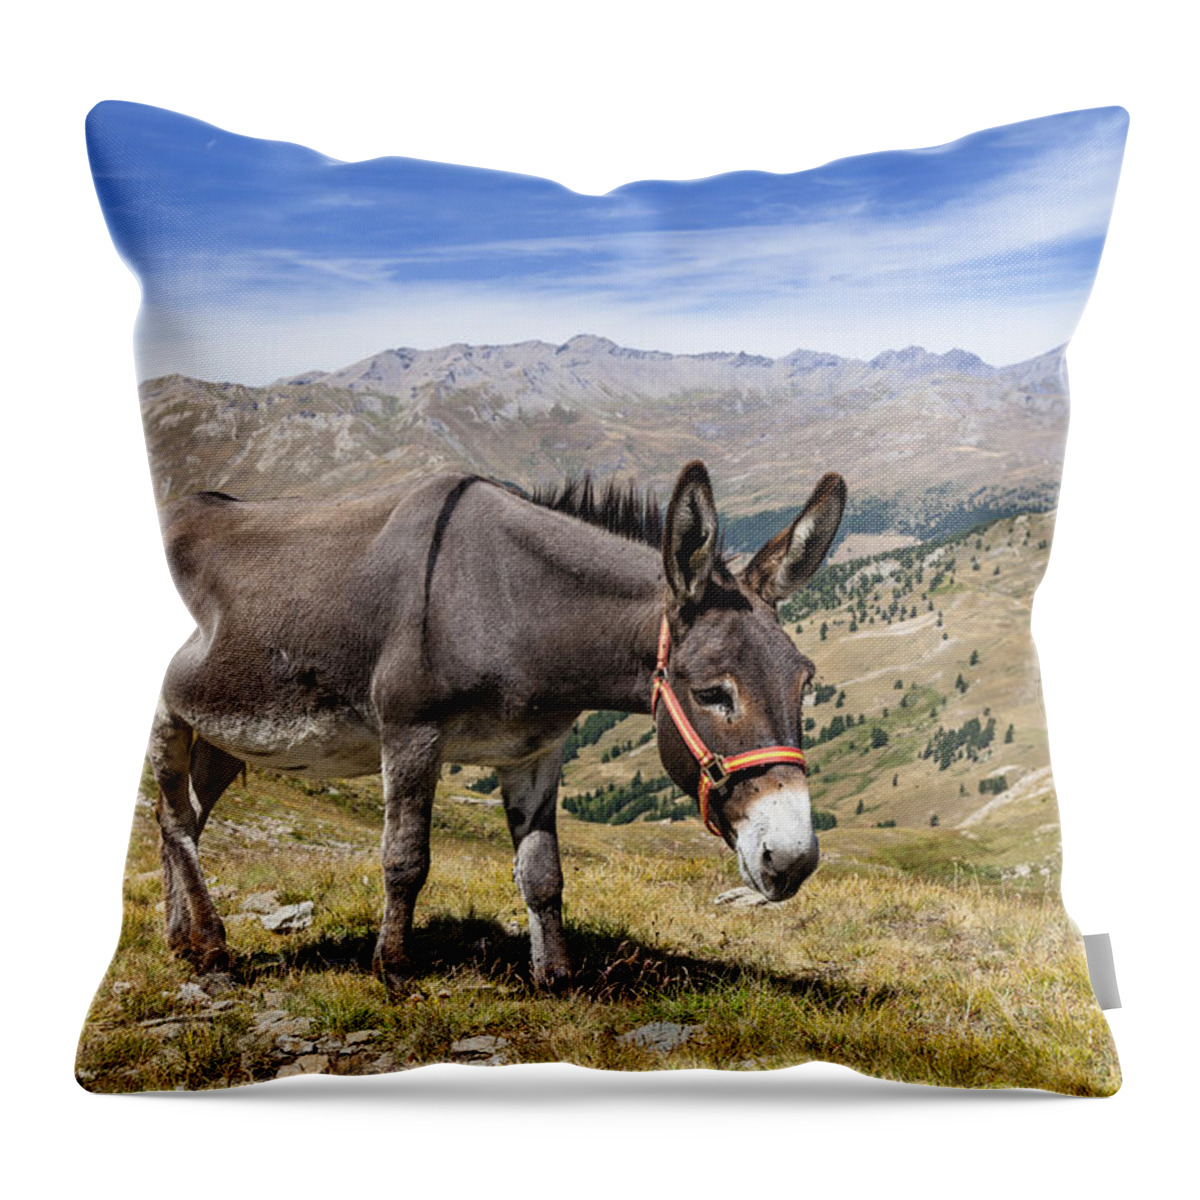 Feb0514 Throw Pillow featuring the photograph Donkey Alps France by Konrad Wothe